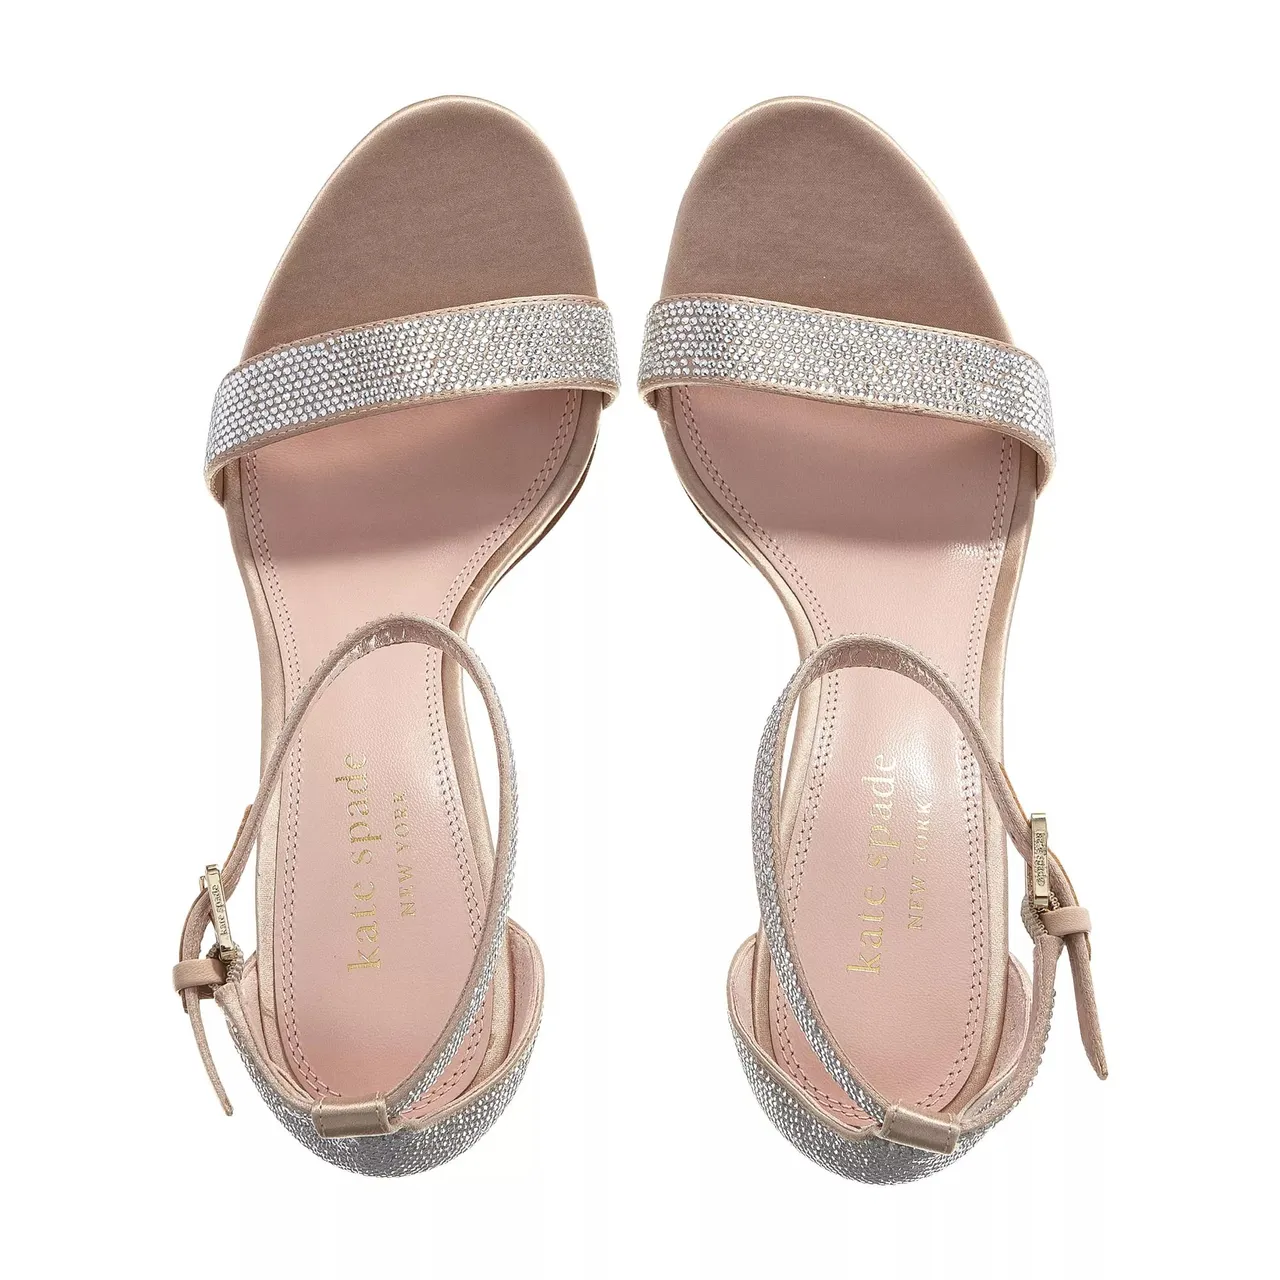 Kate Spade New York Sandals - Alora Pave - rose - Sandals for ladies